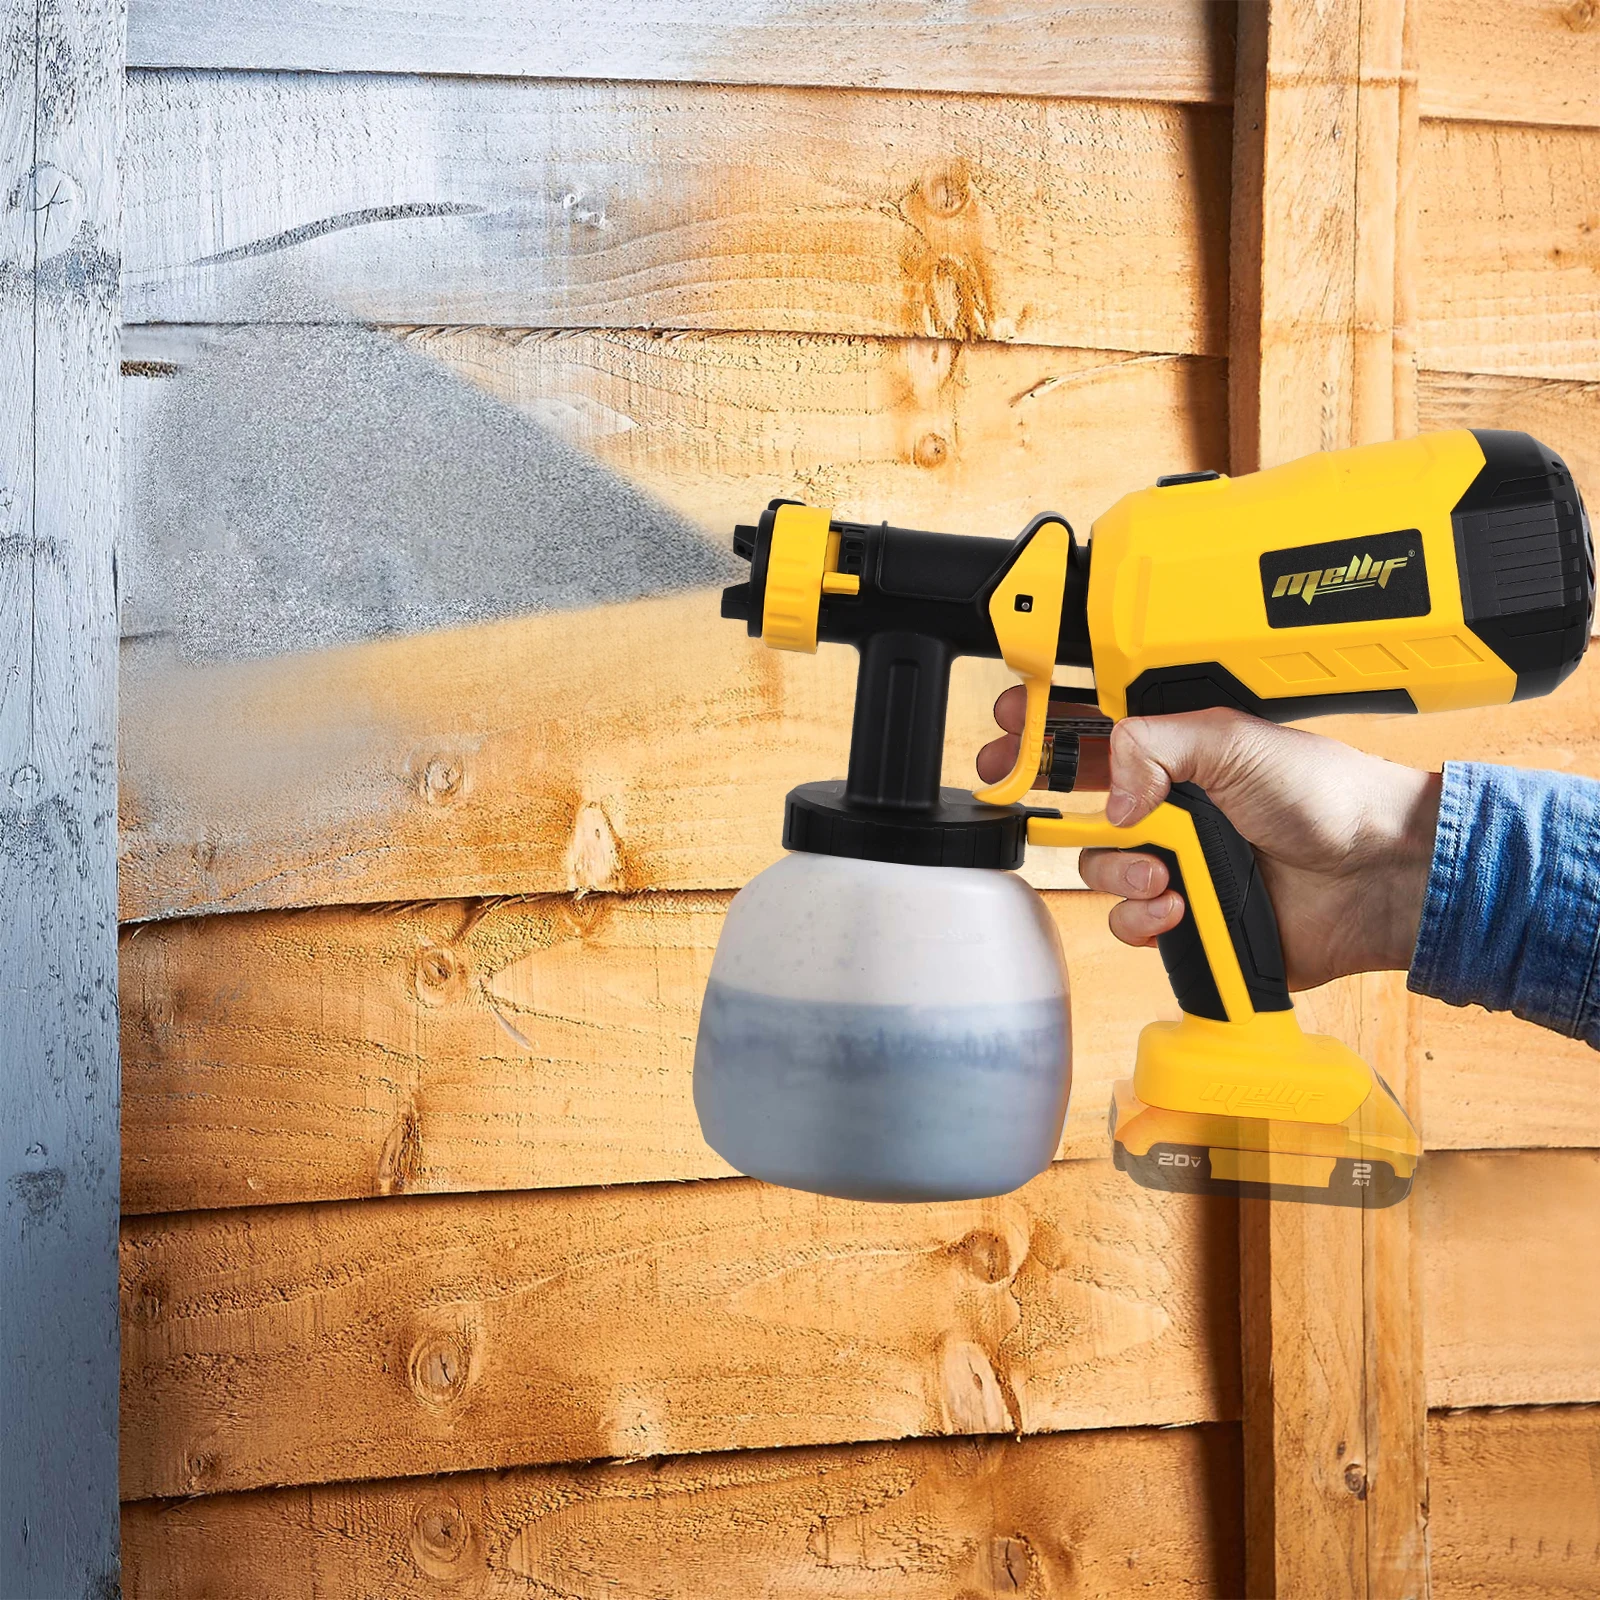 Spray Gun for dewalt 18v 20v max battery Cordless Paint Sprayer Gun with 3 Spray Patterns for Painting Ceiling Fence(NO Battery) enlarge